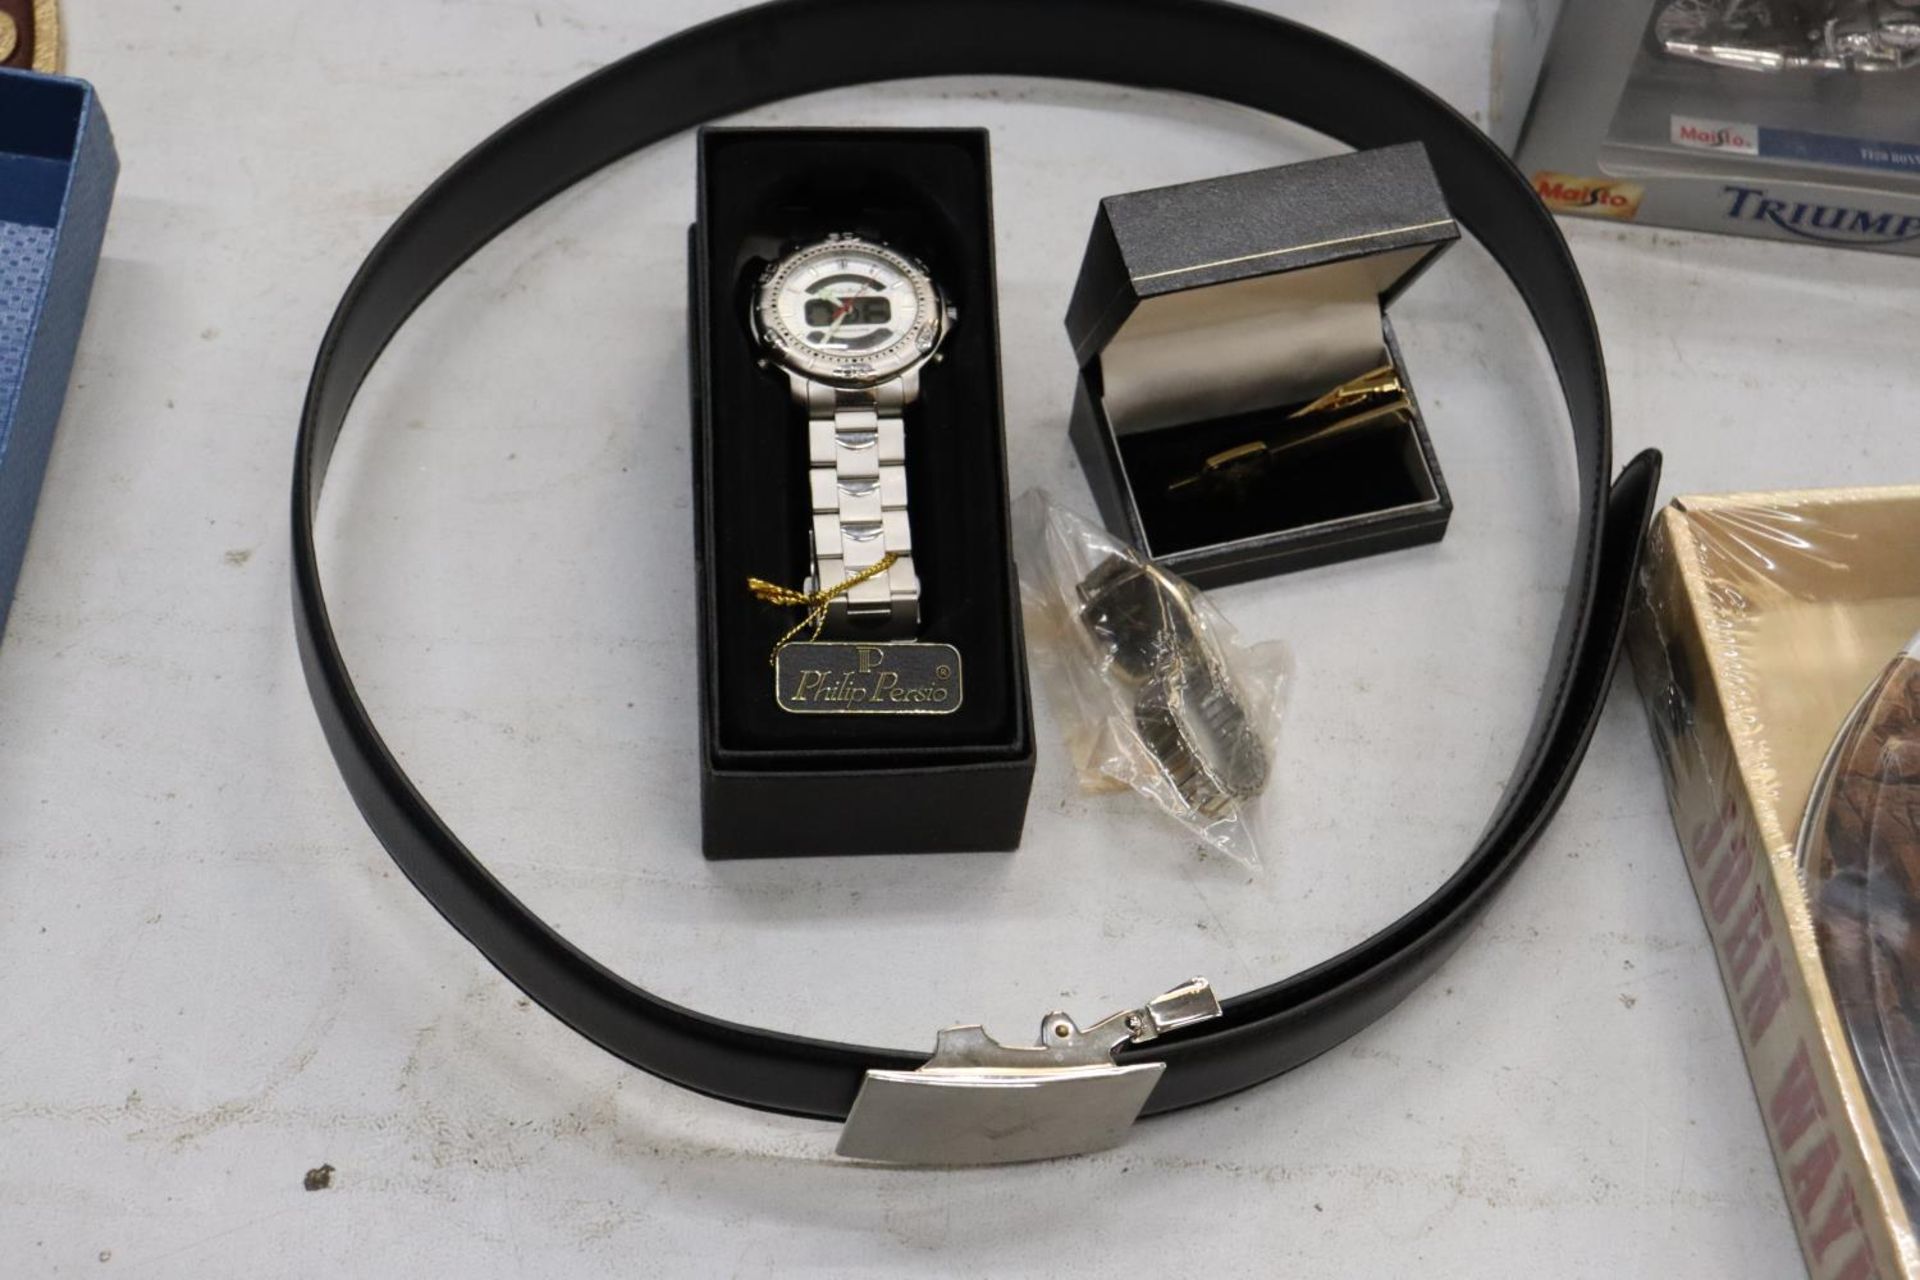 TWO MASONIC ITEMS TO INCLUDE A 'JOHN BRUNNER LODGE' BELT AND A TIE CLIP, PLUS TWO WRISTWATCHES